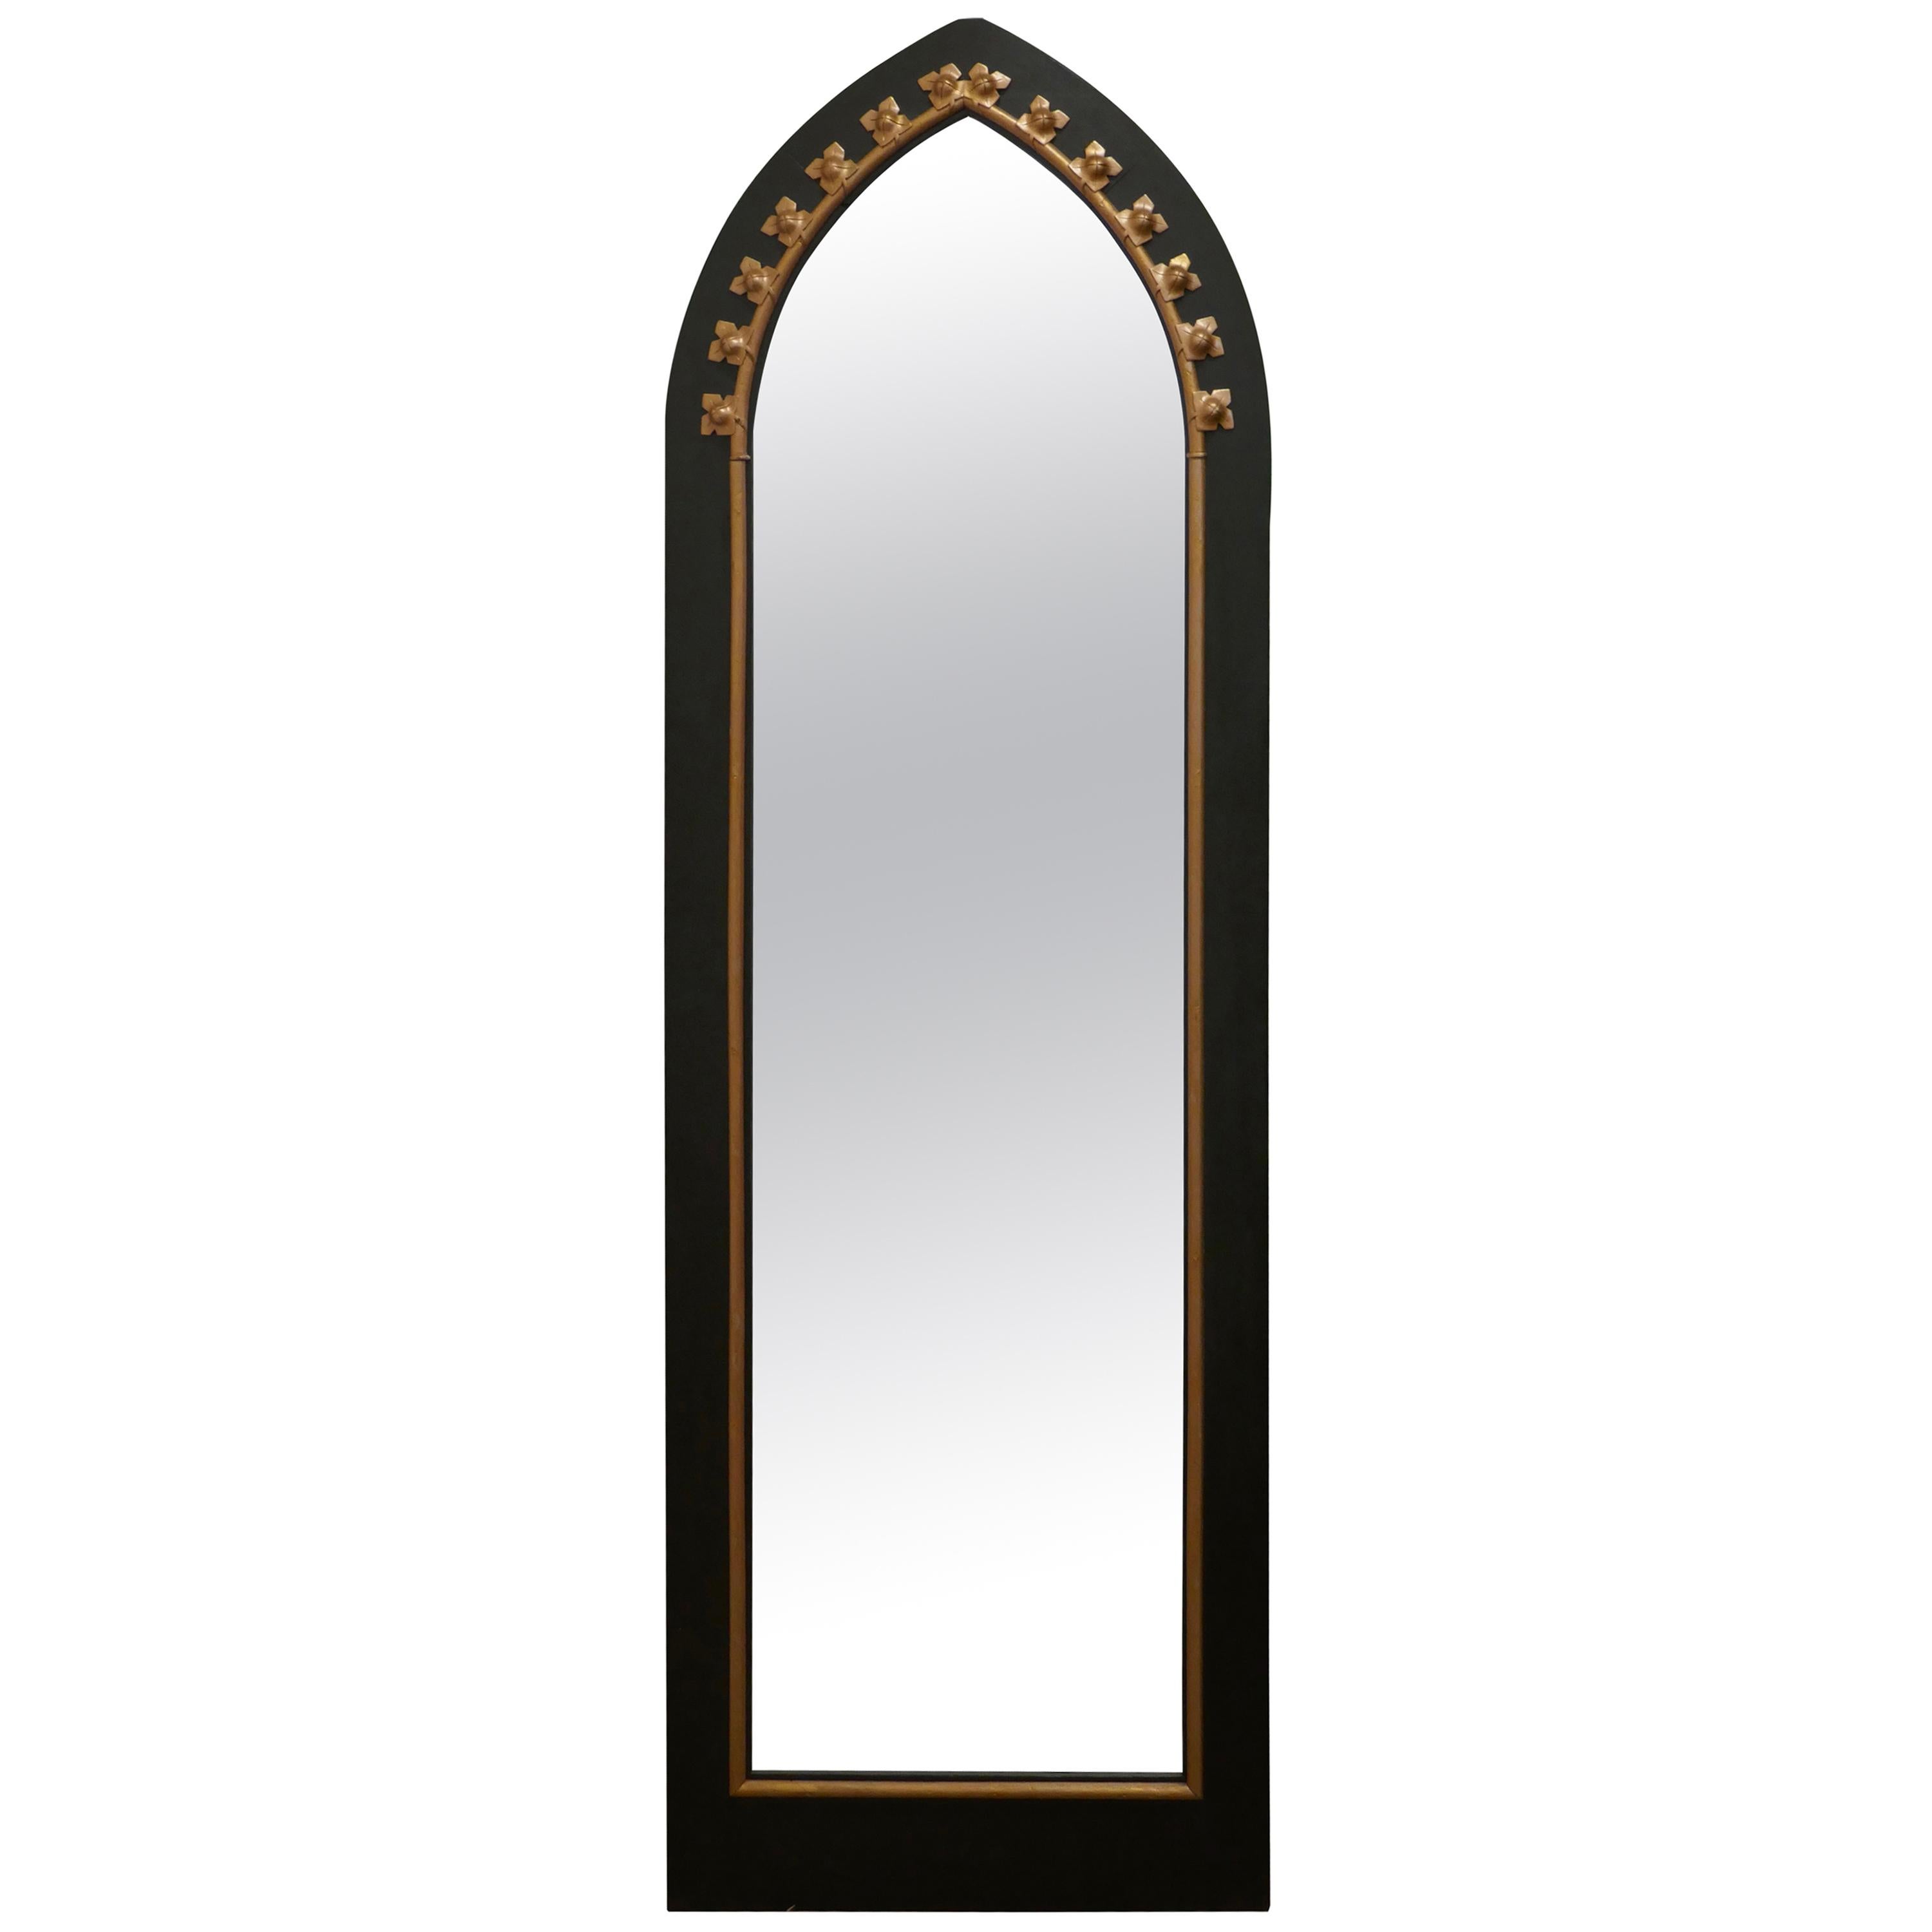 Tall Console Mirror, with an Arts & Crafts Gothic Frame